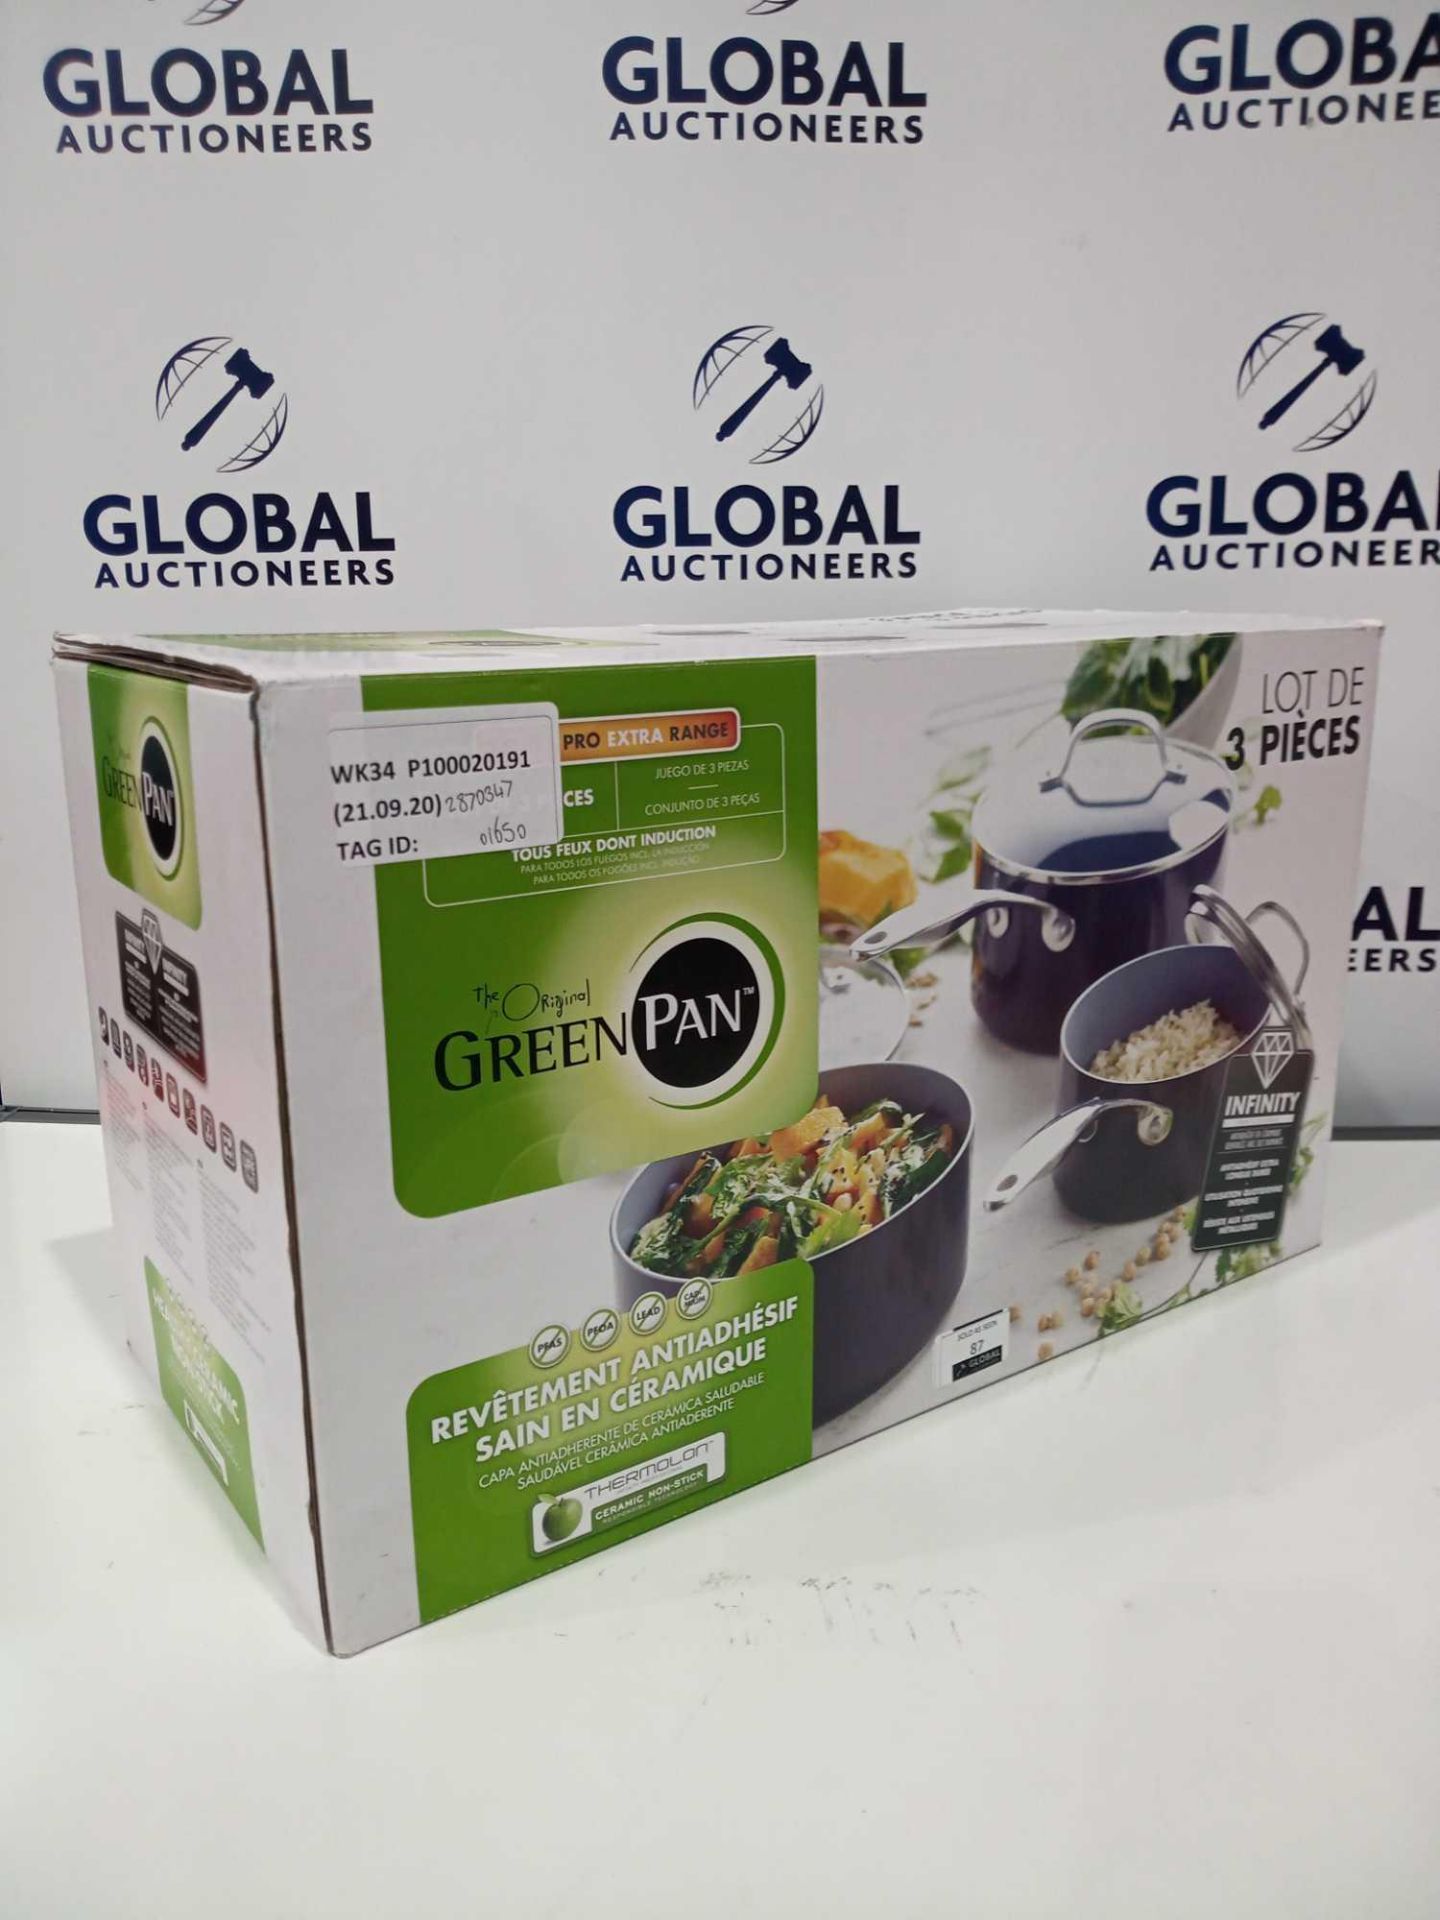 Rrp £165 Boxed The Original Green Pan 3 Piece Pan Set With Ceramic Non-Stick Technology